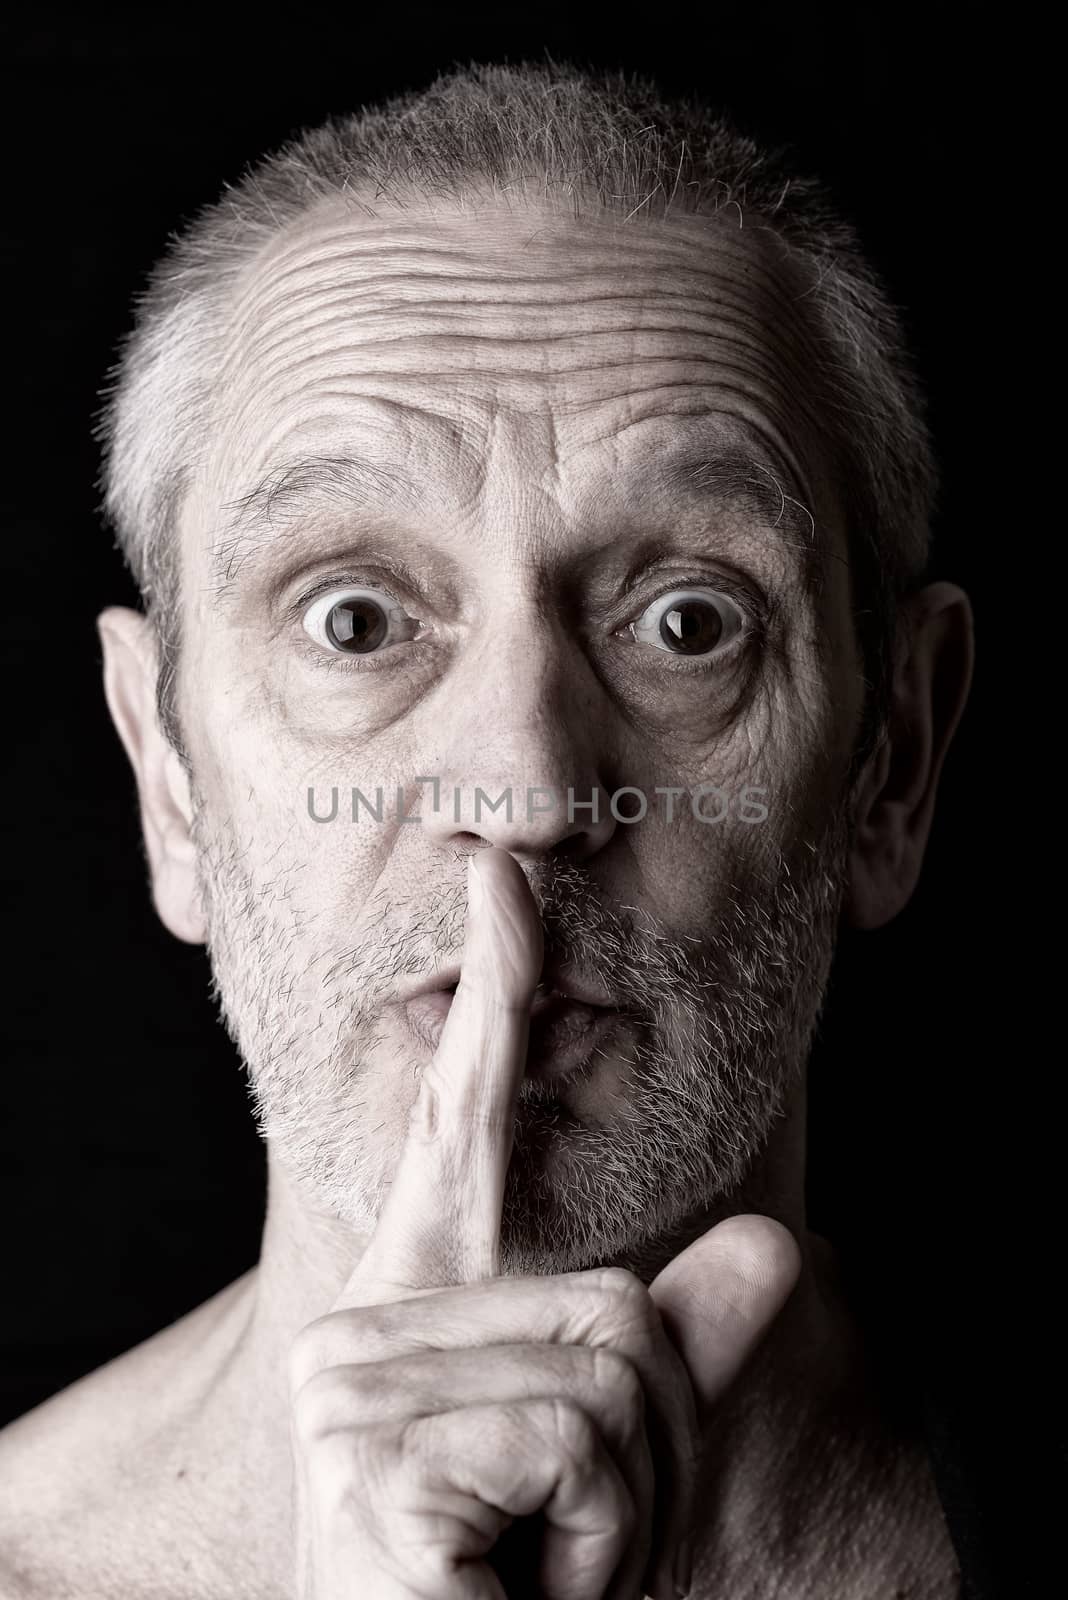 Portrait of an attractive adult man putting the finger in front of the mouth and saying "Hush!"